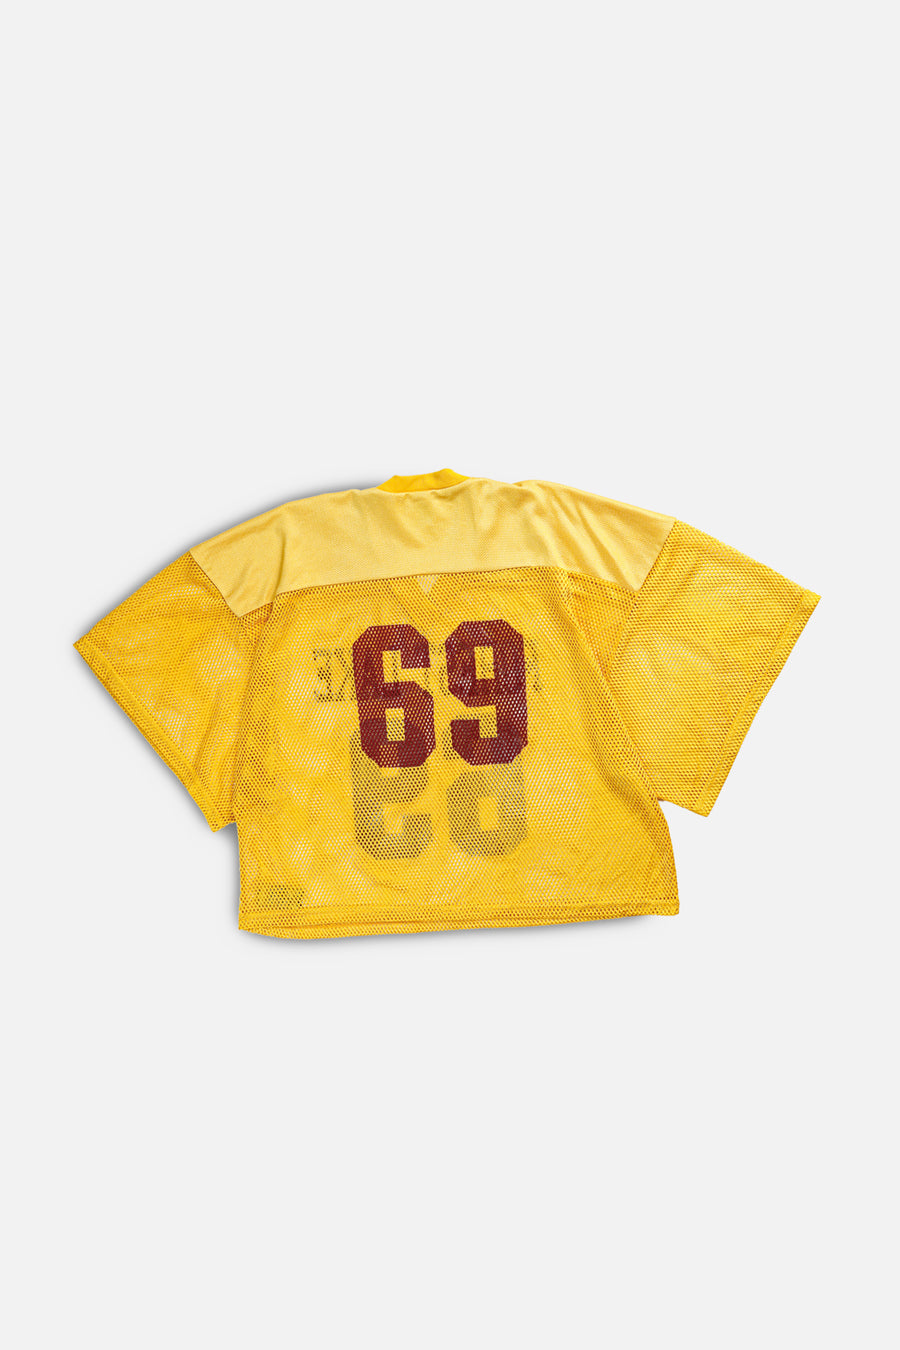 Vintage Forest Lake Football Jersey - L